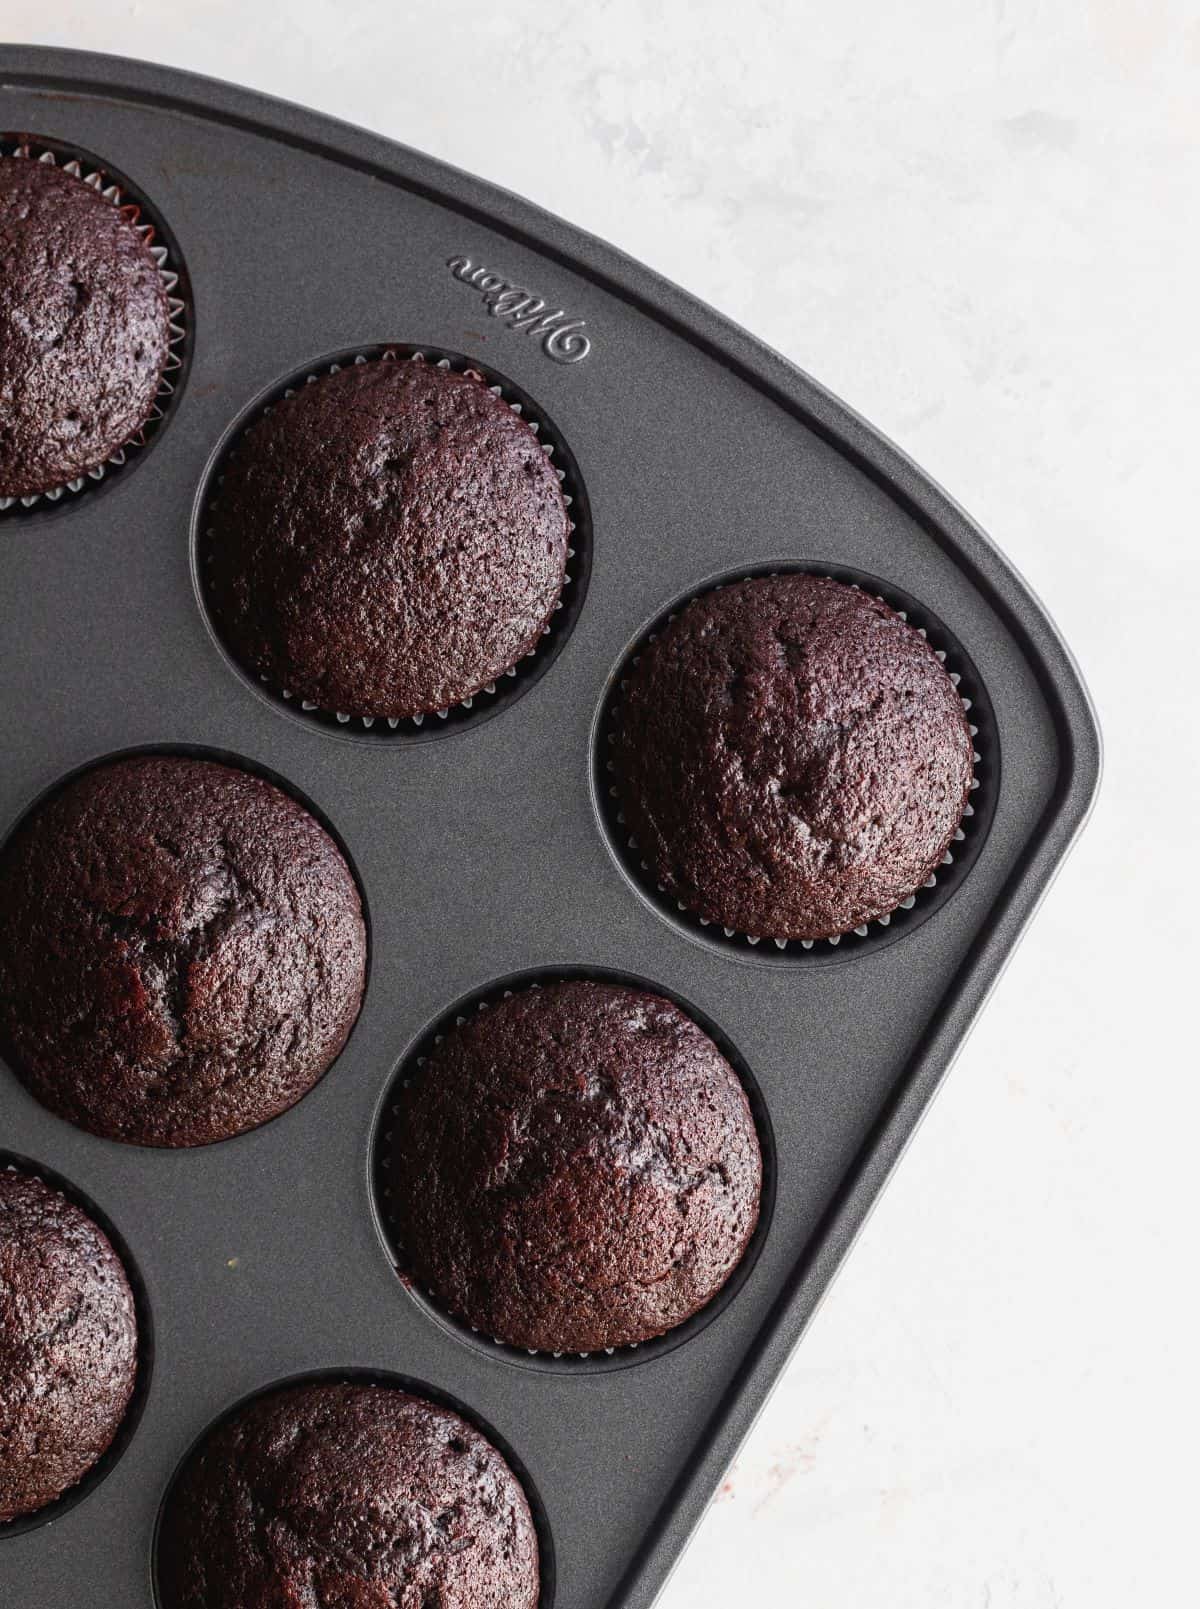 Cupcakes in the tin.